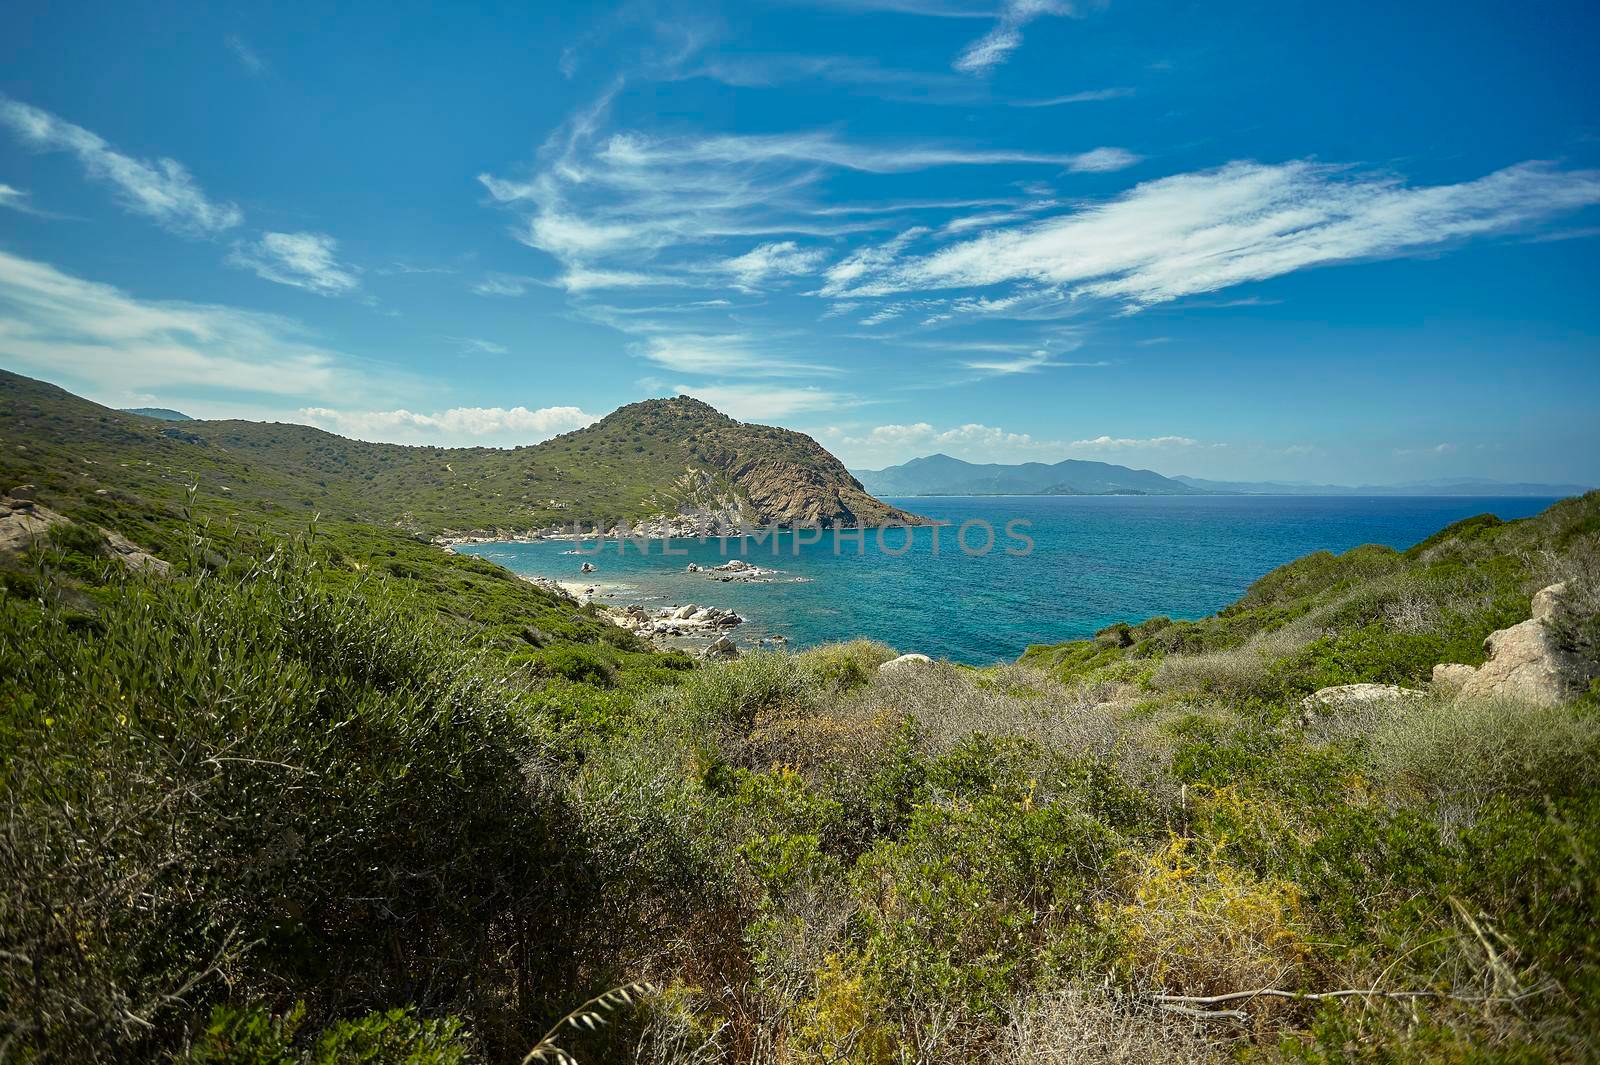 Panorama of a natural bay in the south of Sardinia in Italy with the mountains overlooking the sea in broad daylight during the summer.